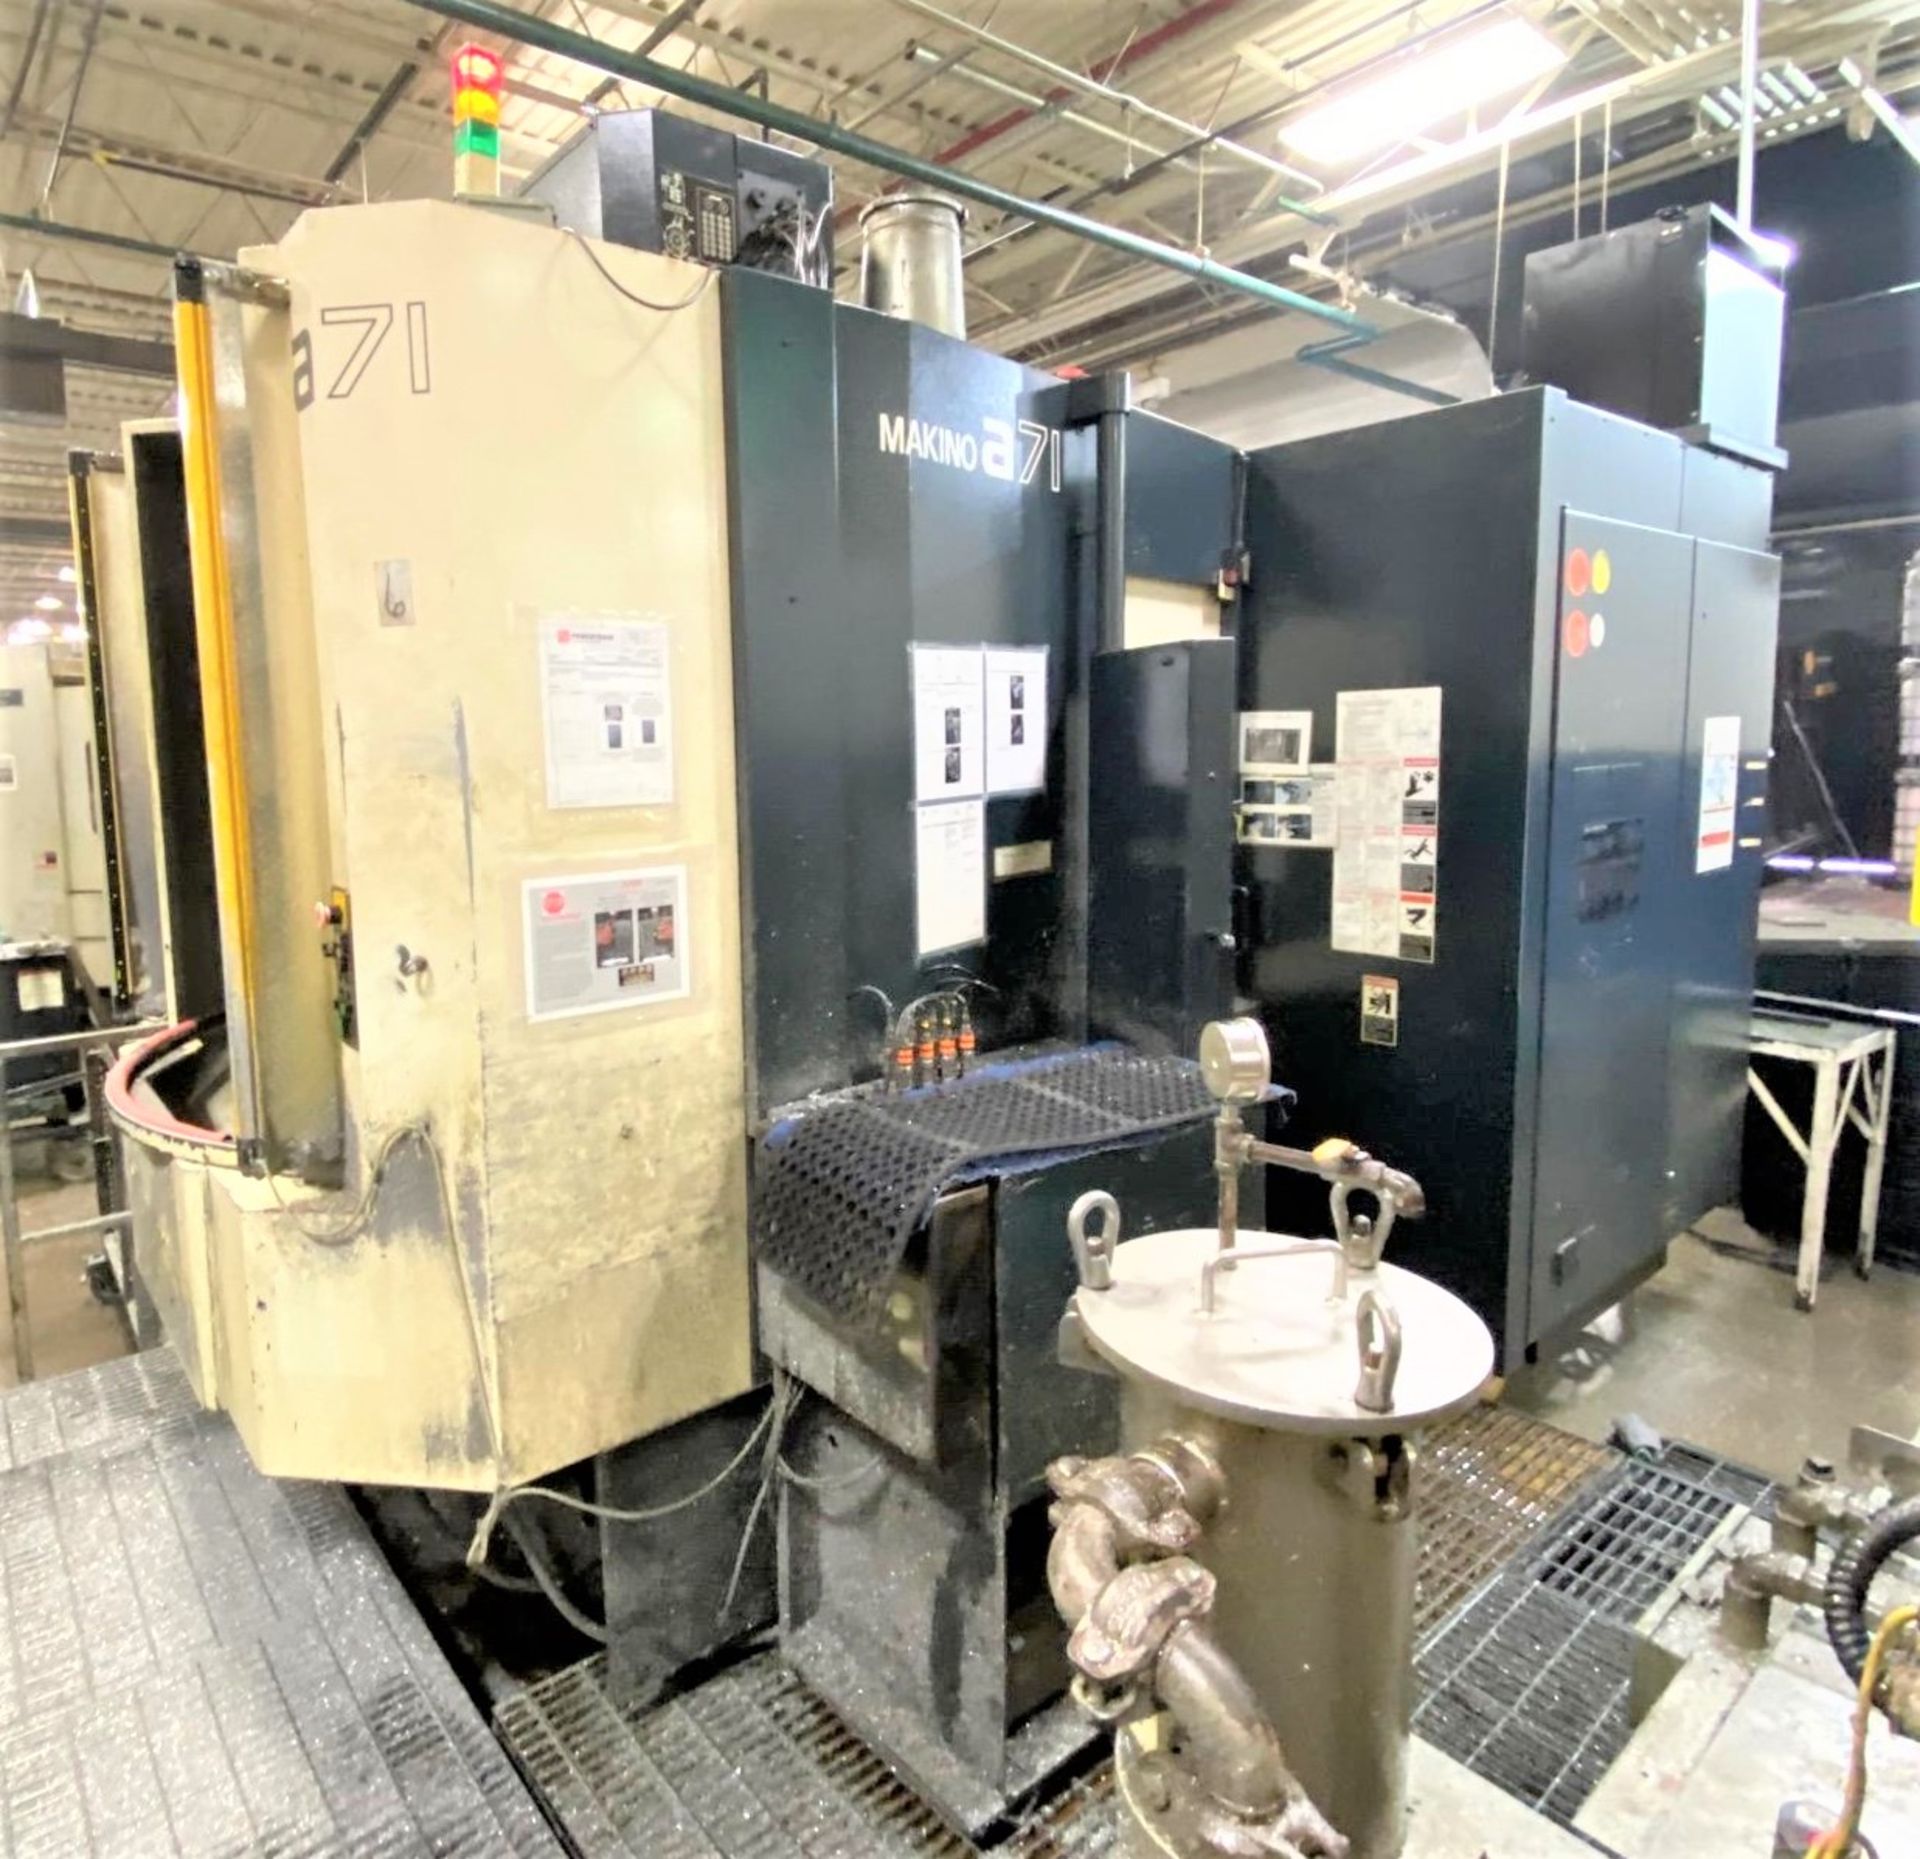 20"x20" Pallet Makino A71 CNC 4-Axis Precision Horizontal Machining Center, New 2004 - Image 5 of 9